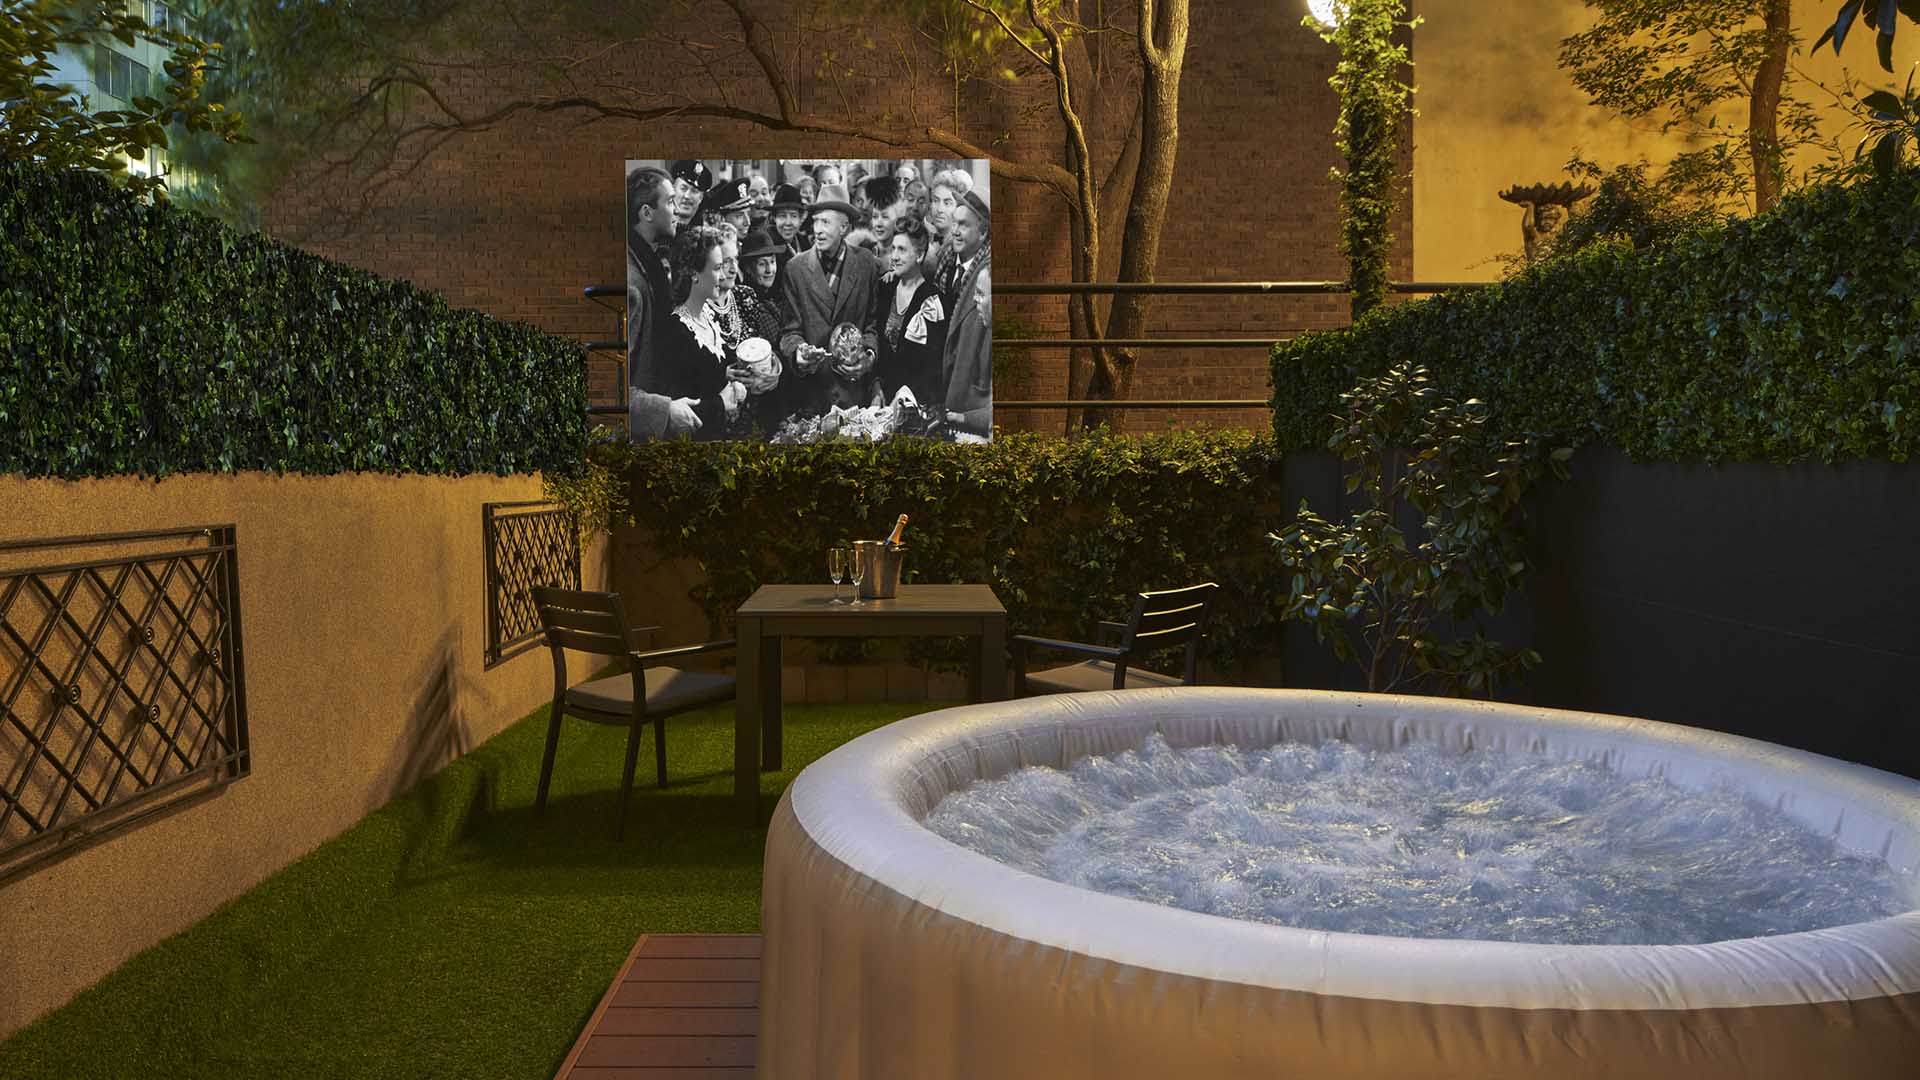 This Melbourne Hotel Has Added a Hot Tub and Outdoor Cinema in a Private Courtyard to Your Next Staycation